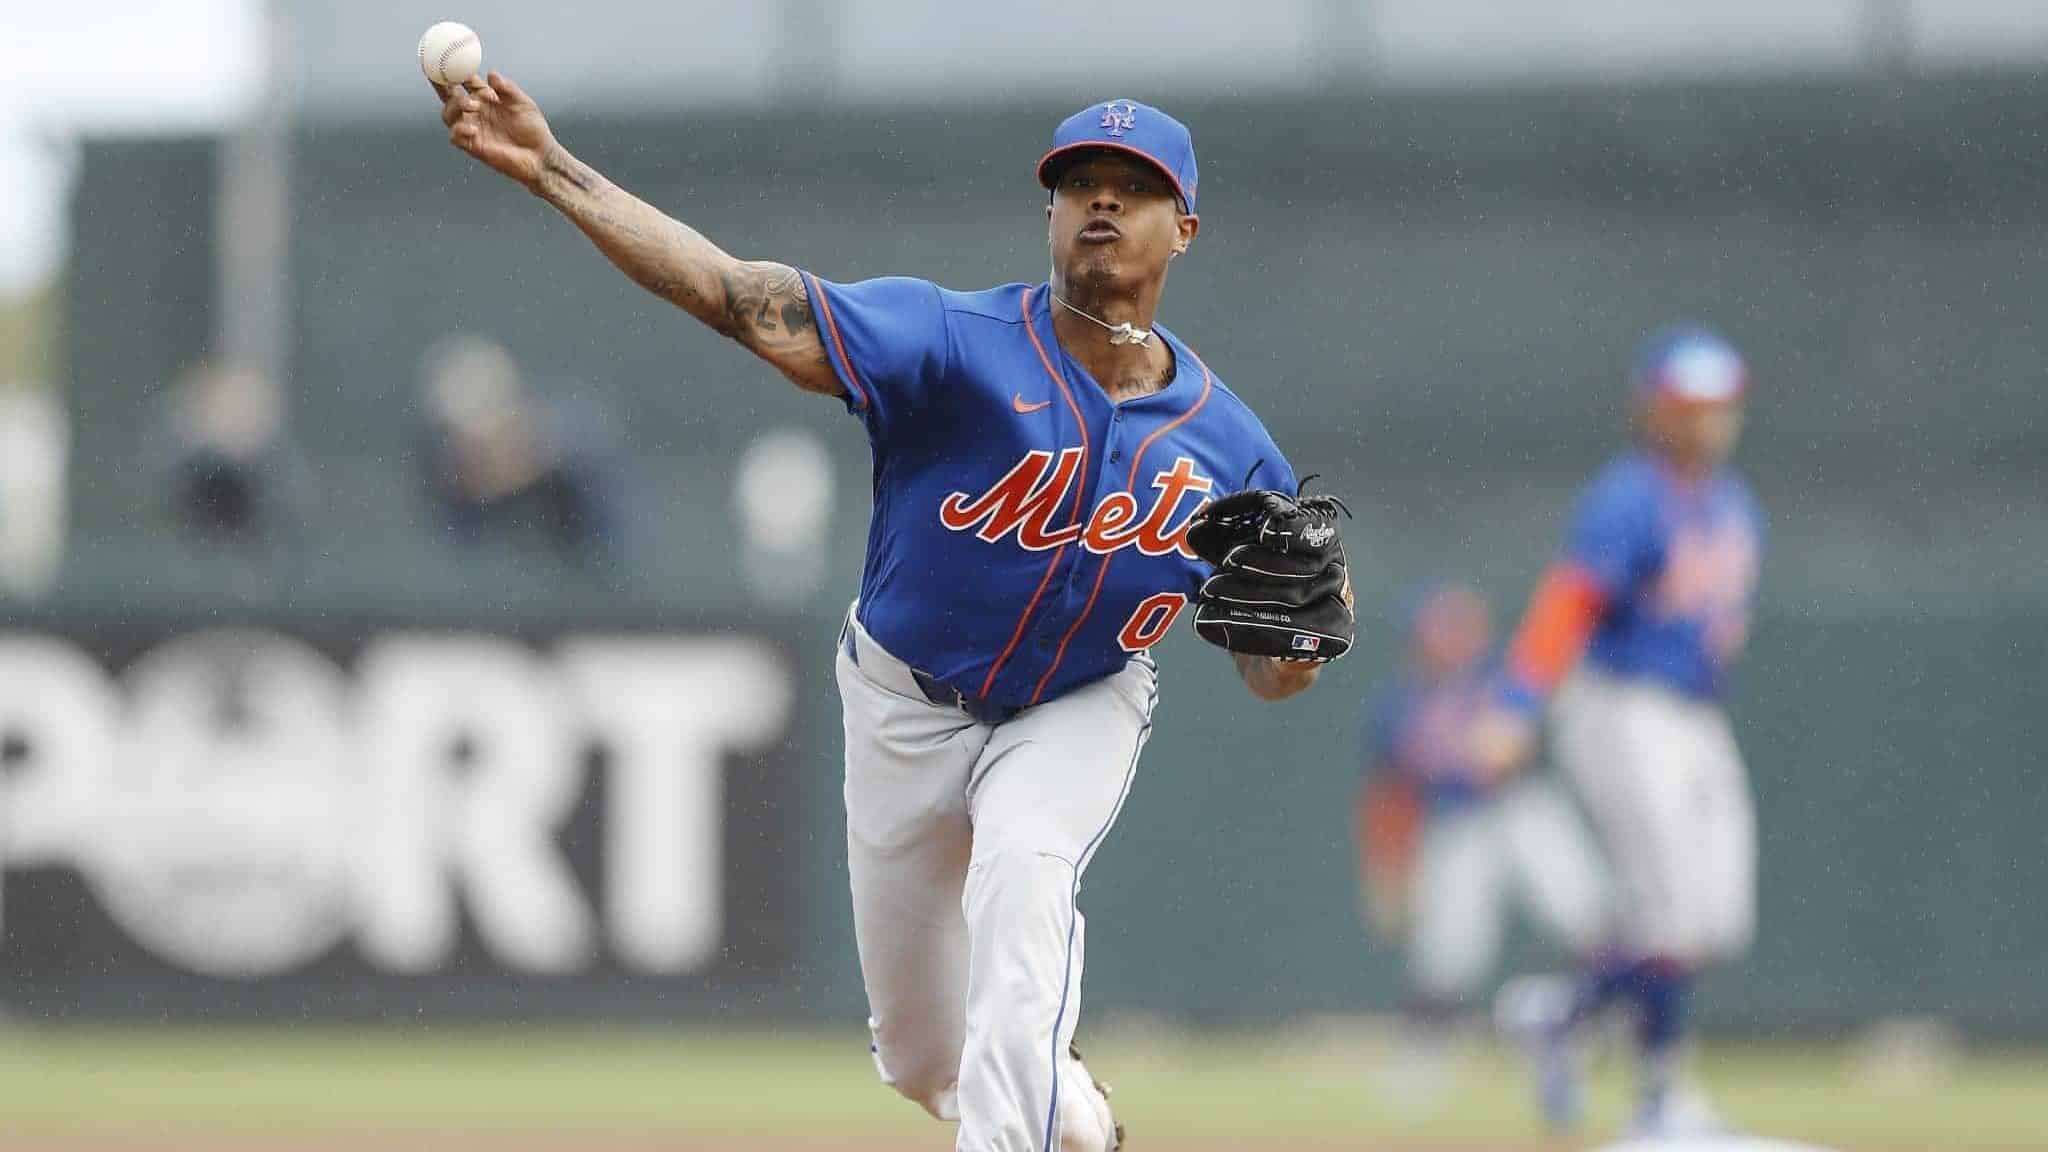 JUPITER, FLORIDA - FEBRUARY 22: Marcus Stroman #0 of the New York Mets warms up in the second inning of a Grapefruit League spring training game at Roger Dean Stadium on February 22, 2020 in Jupiter, Florida.